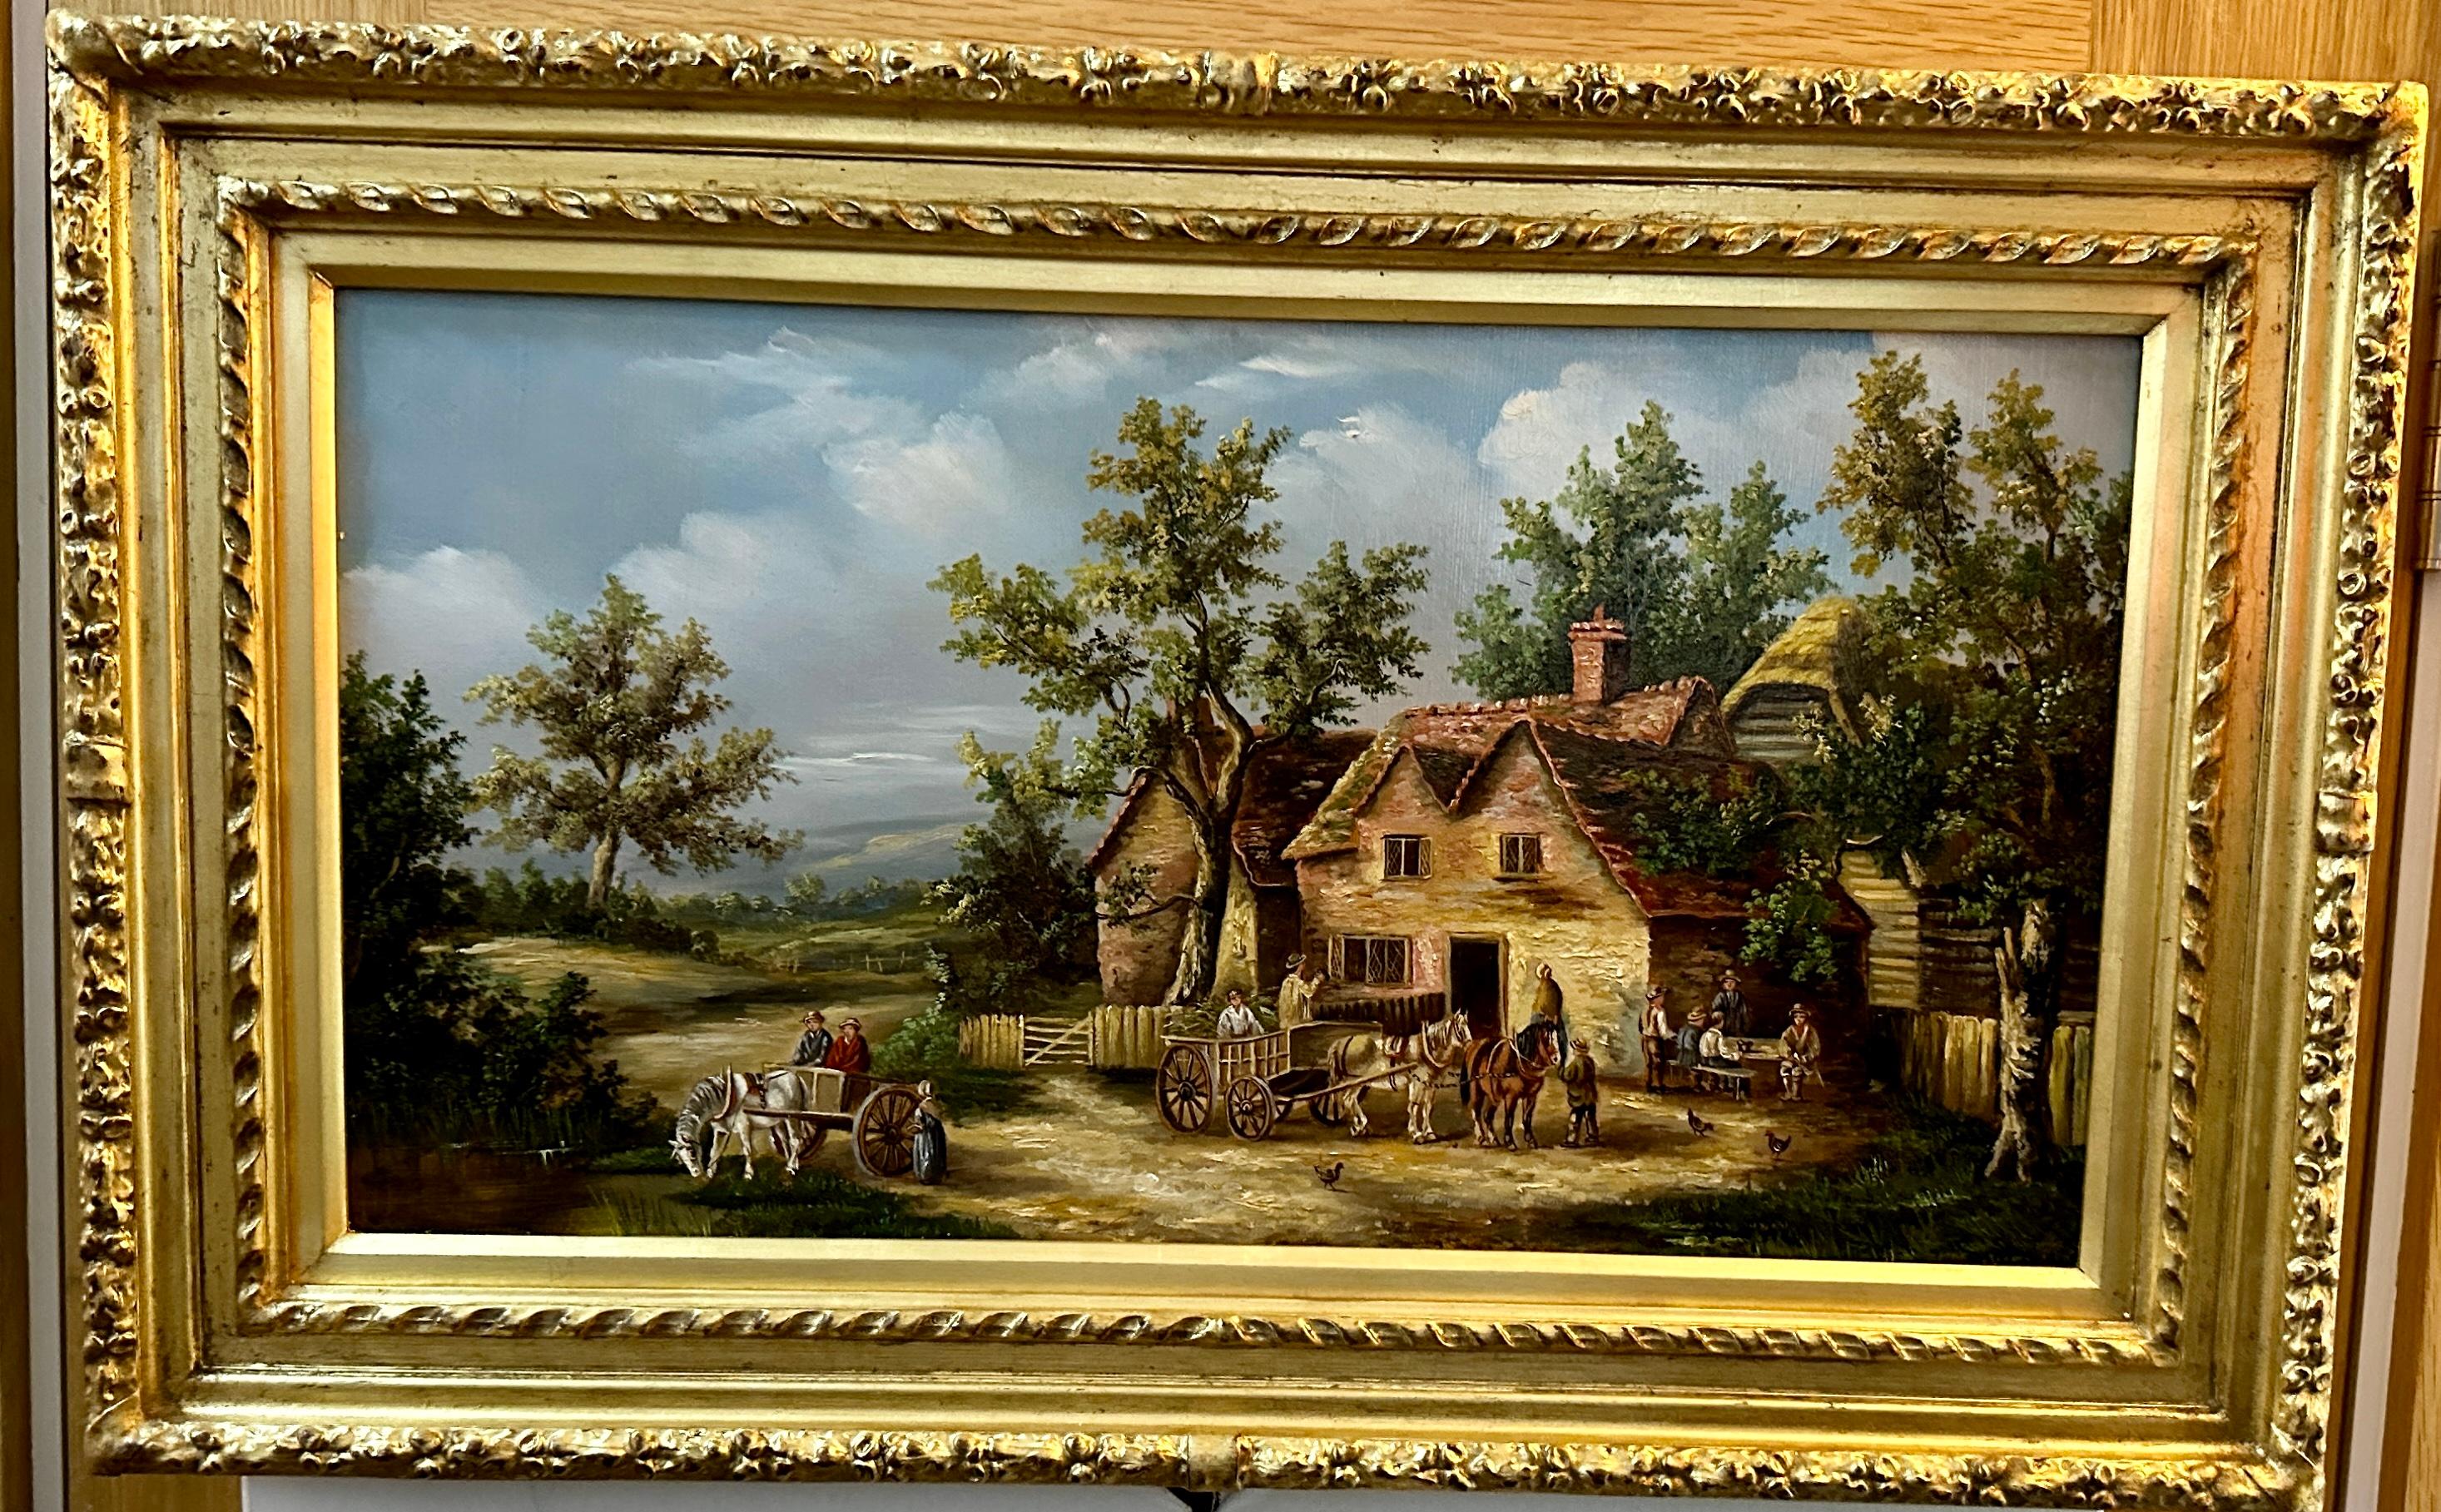 19th century English village scene with cottages, horses landscape and people